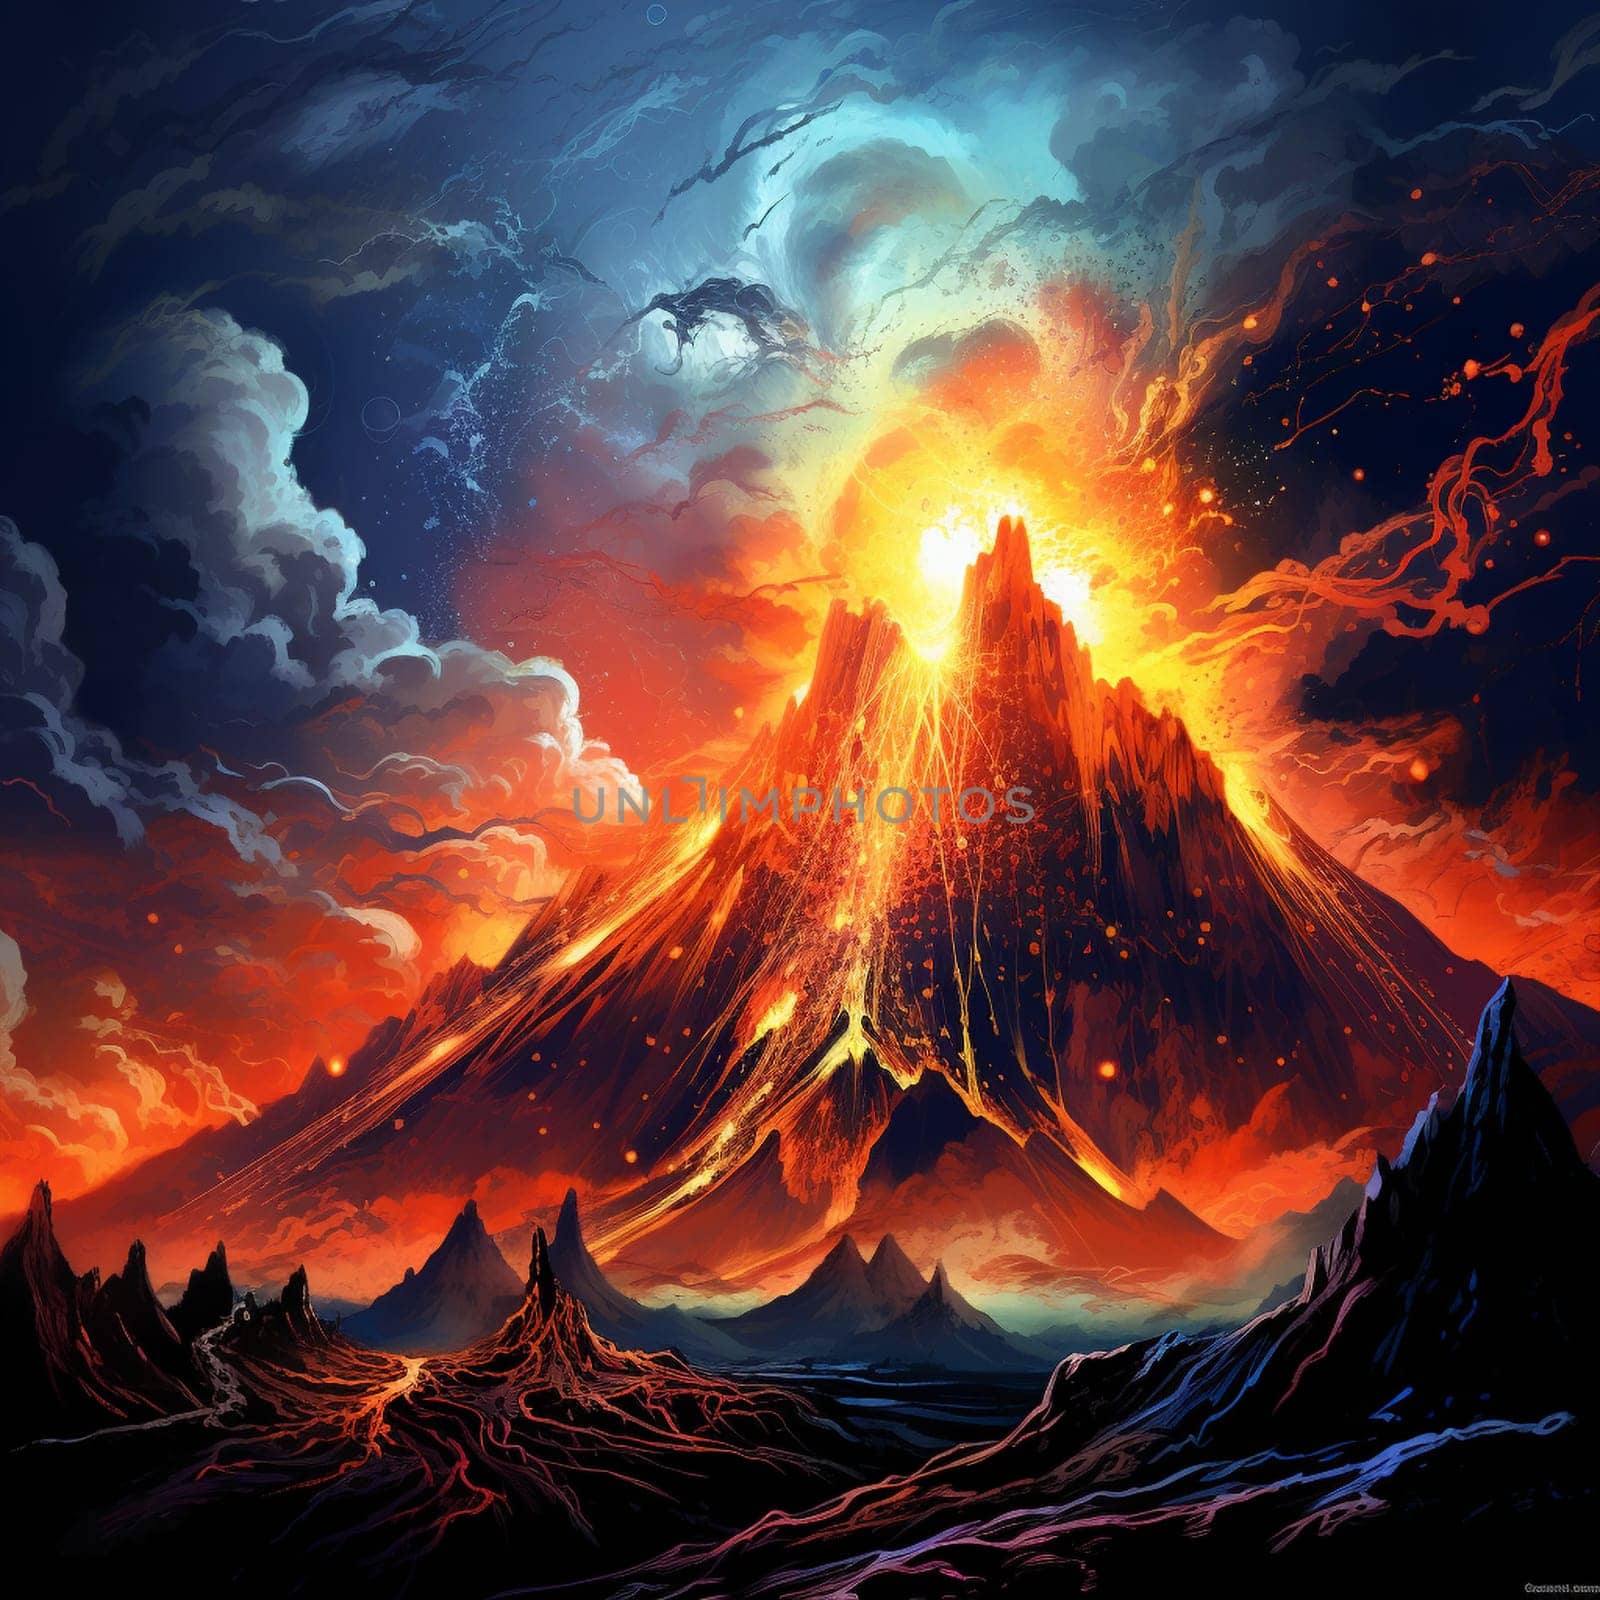 Experience the raw power and intensity of a volcanic eruption in this vibrant and captivating digital illustration. Titled 'Volcanic Tremor,' this artwork showcases a breathtaking scene that will surely captivate viewers. Marvel at the swirling plumes of volcanic ash, the mesmerizing sight of molten lava cascading down the slopes, and the fiery explosions that light up the sky. This image perfectly captures the destructive force and awe-inspiring beauty of nature's fiery display. The contrast between the dark, rugged landscape and the fiery eruption adds another layer of visual impact.